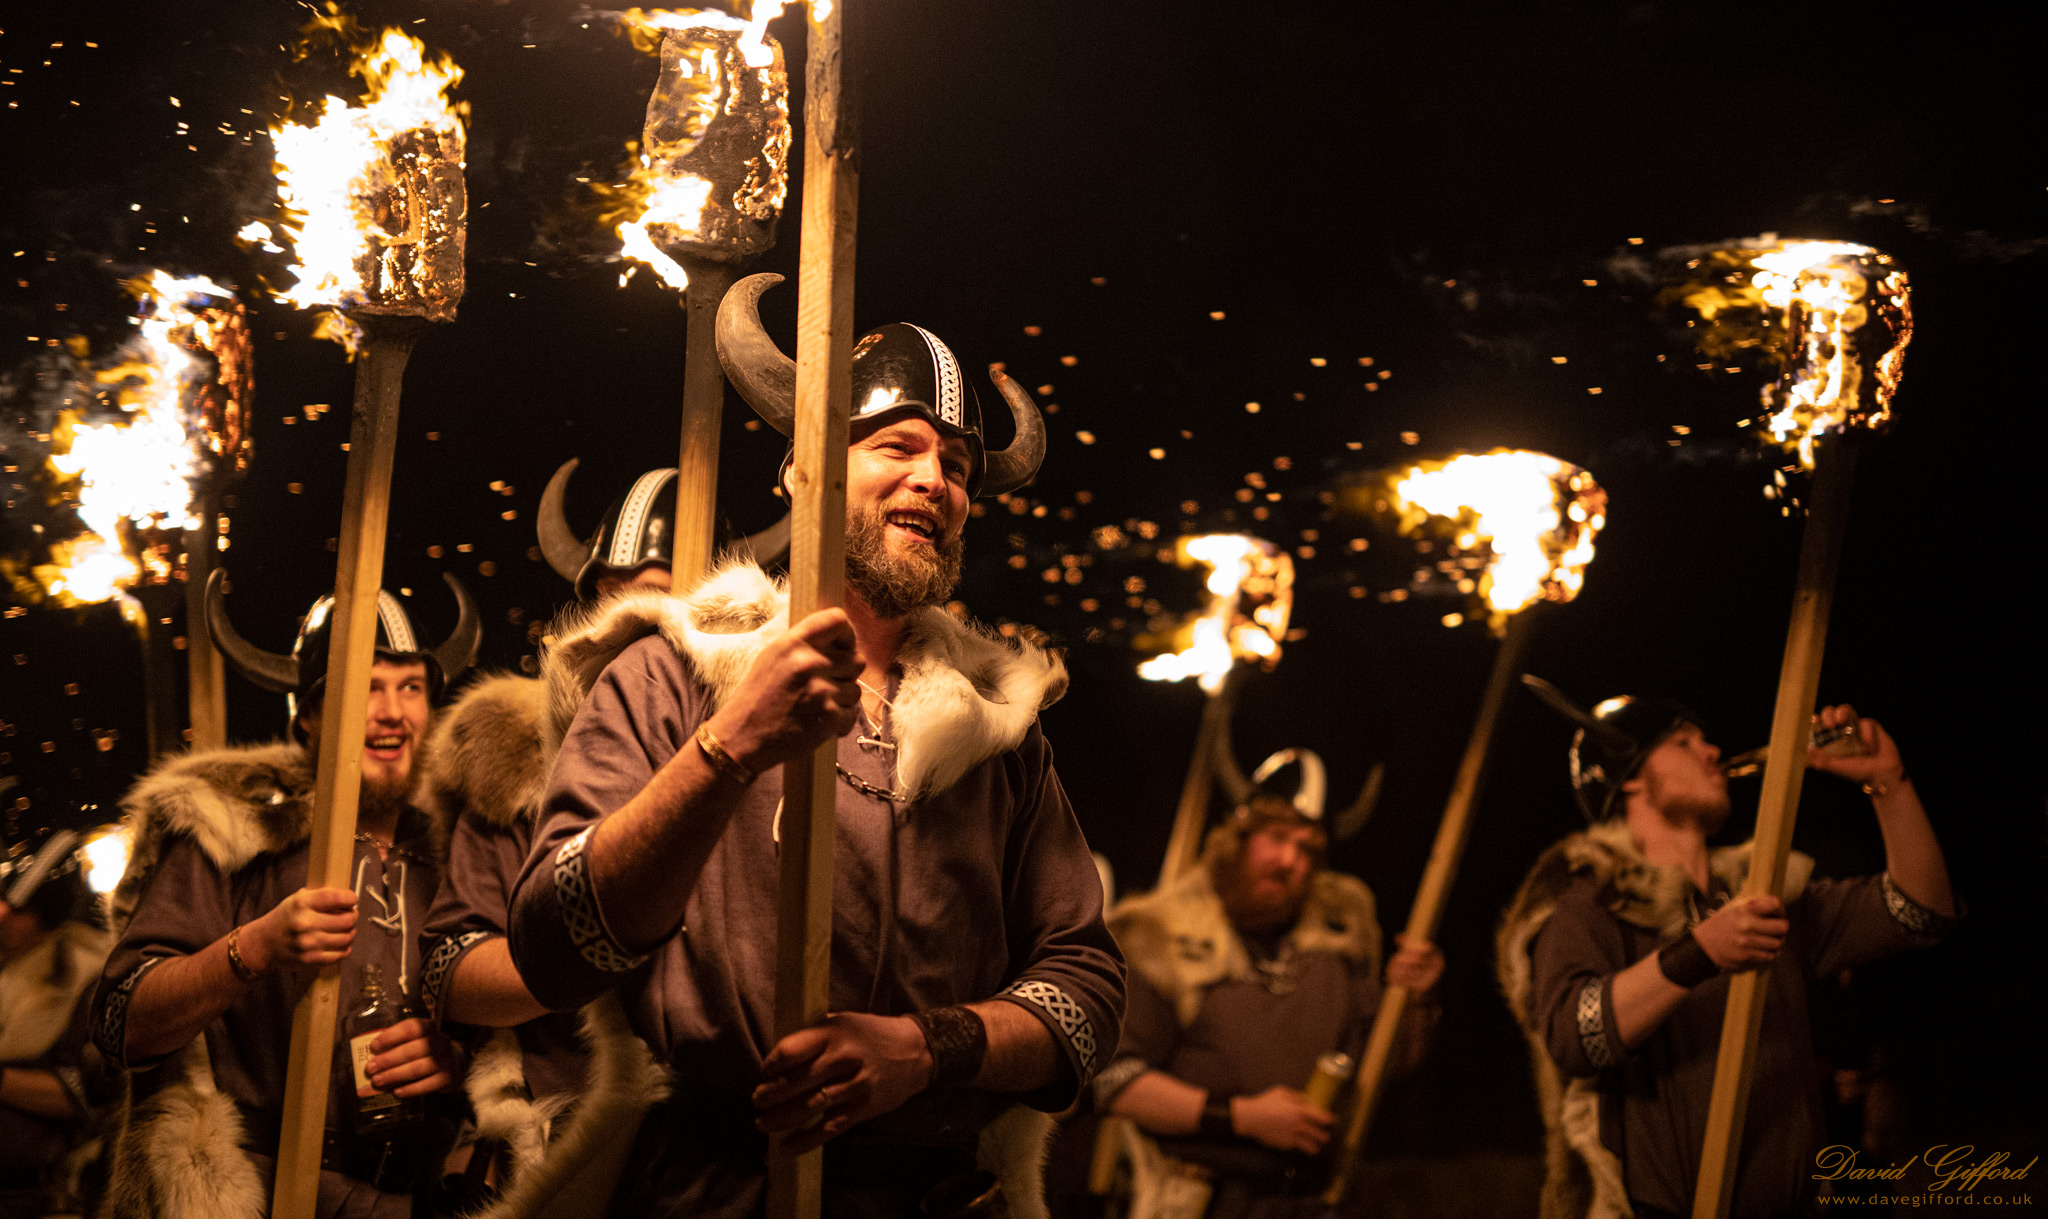 Photo: Nesting and Girlsta Up Helly Aa 2020: Storm Proof